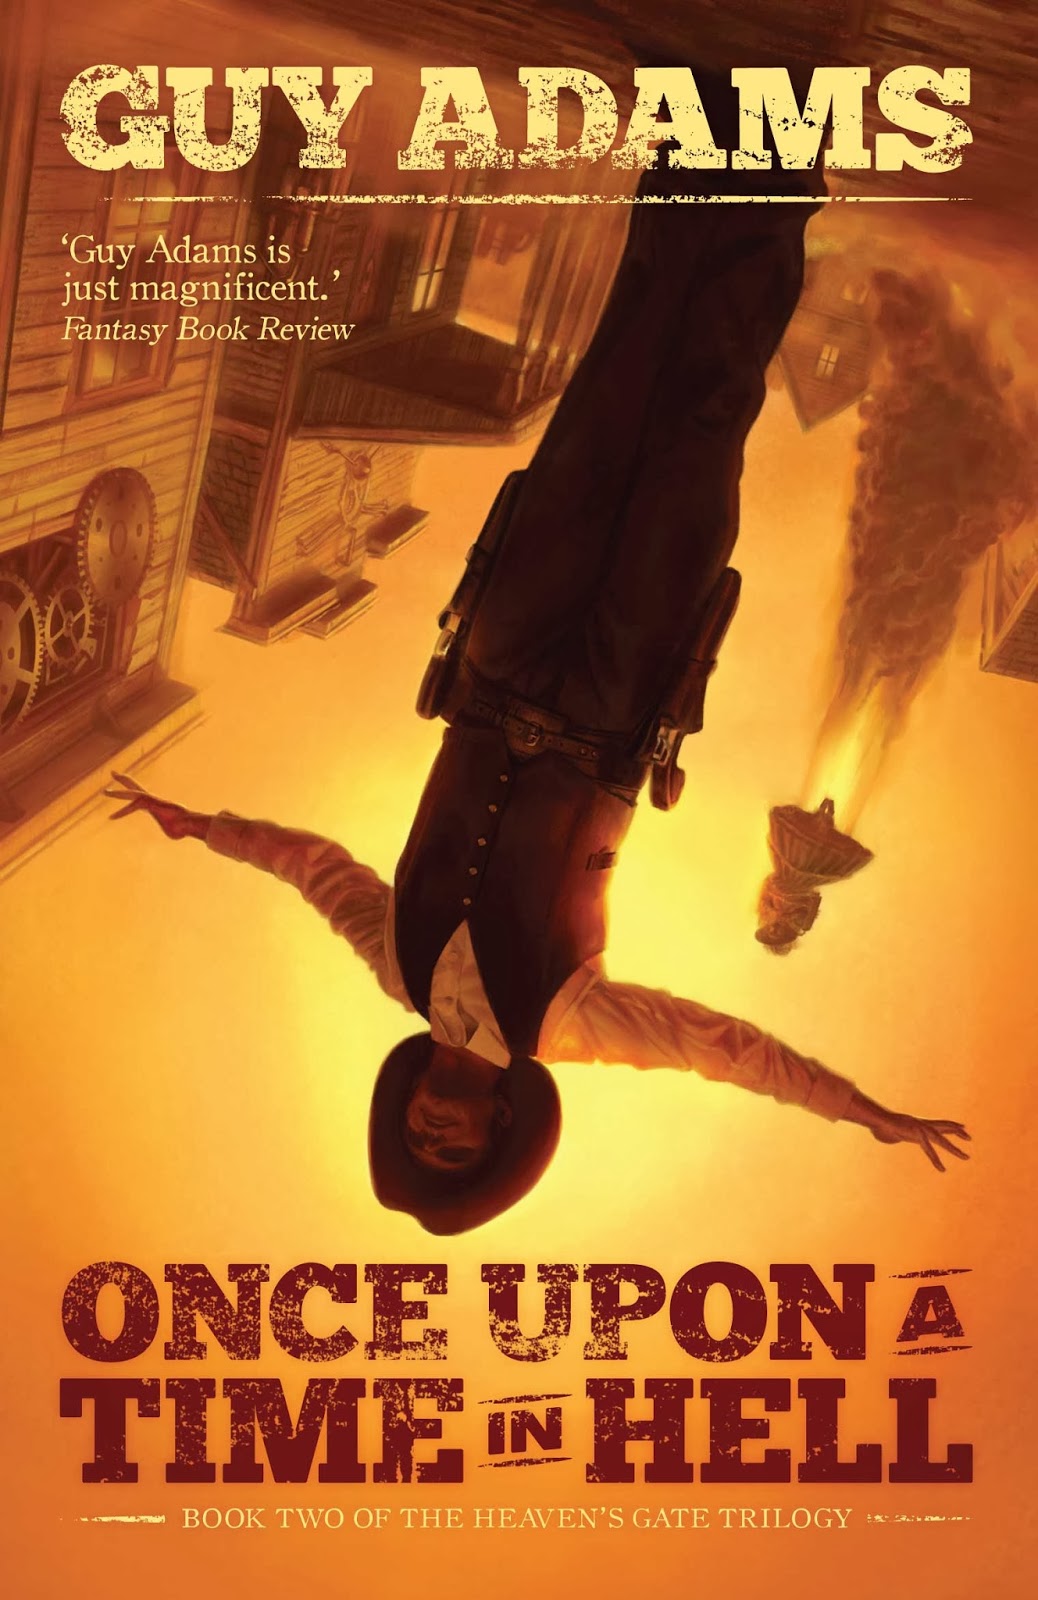 The Baryon Review: Once Upon a Time in Hell is coming